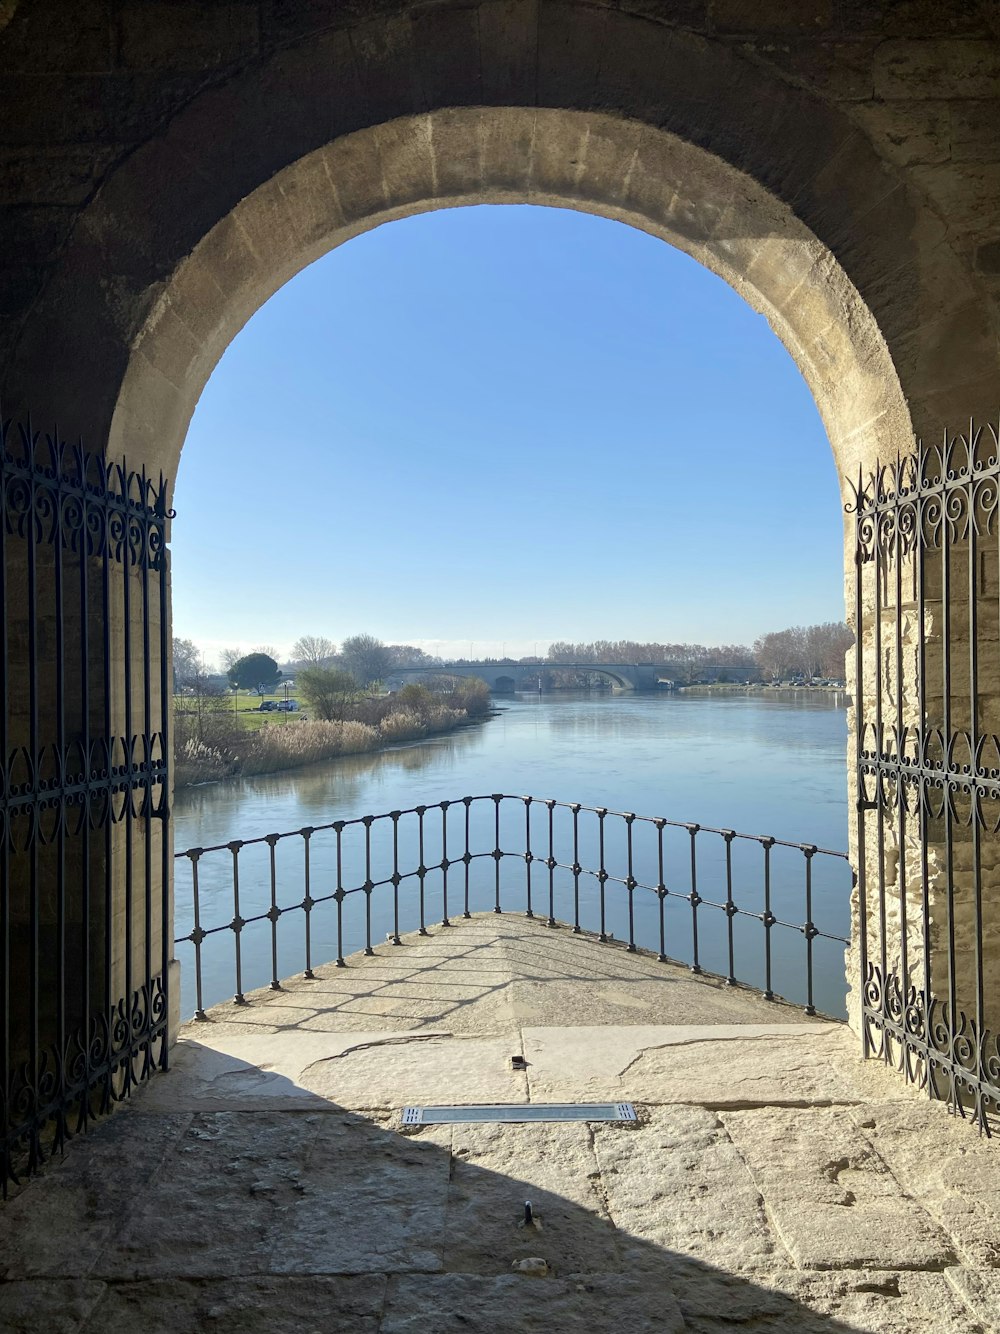 a view of a body of water through a gate